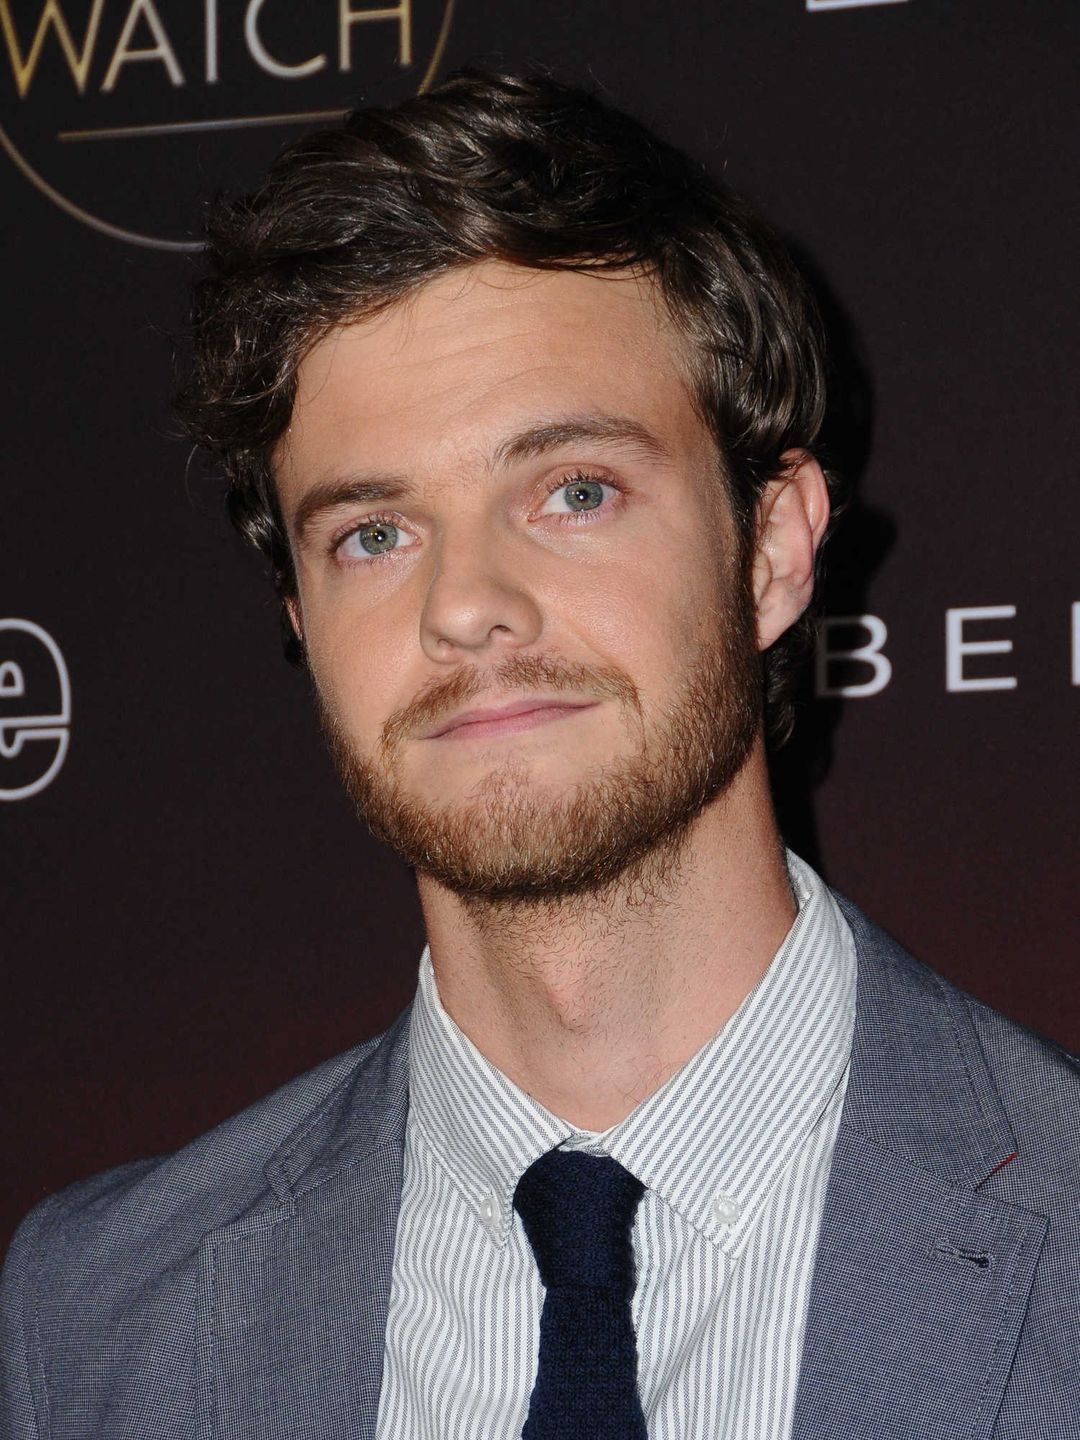 Jack Quaid who is his mother